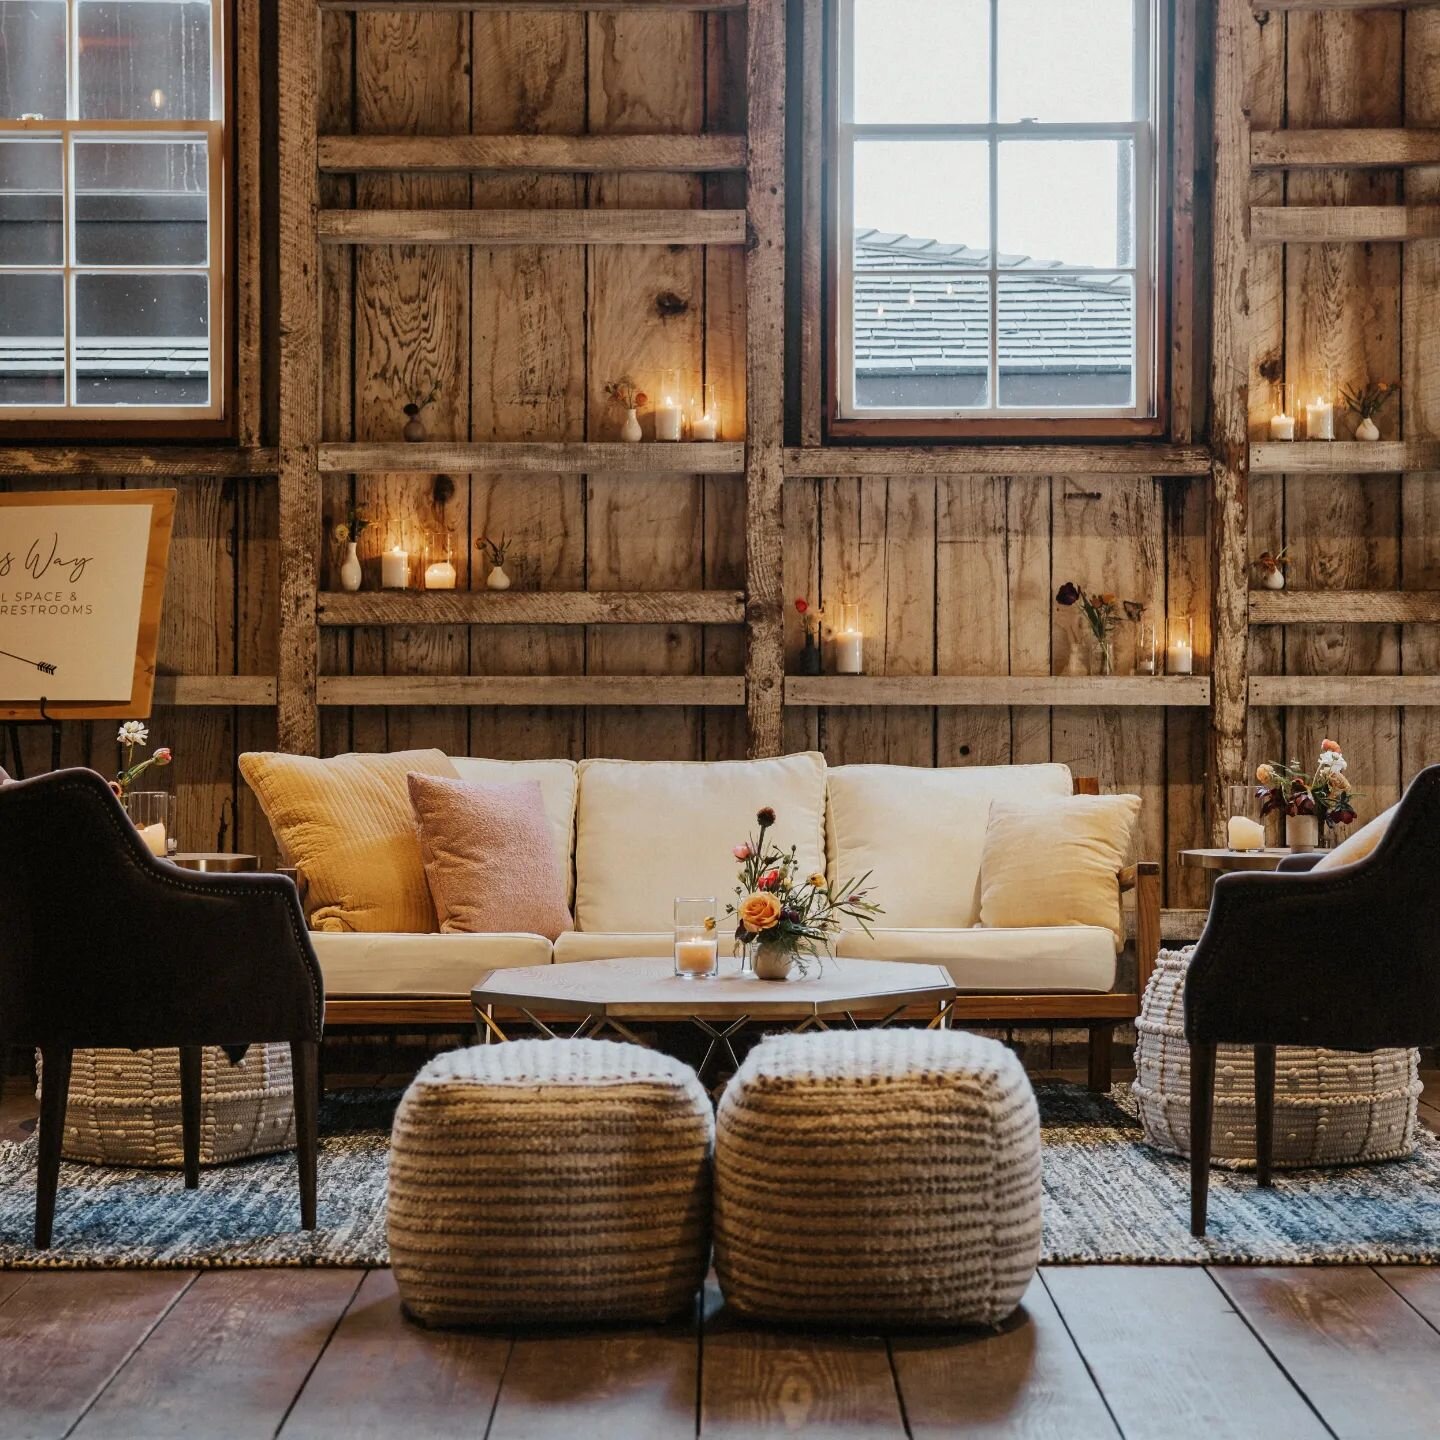 A warm cozy barn, with flowers in every corner, yes please!

Photo + Video: @lovetribeweddings
Venue + Caterer + Bar: @barnsatcoopermolera
Floral: @bloomgeneration
Music: @vybesociety
Hair + Makeup: @blushmonterey
Rentals + Lighting: @chiceventrental